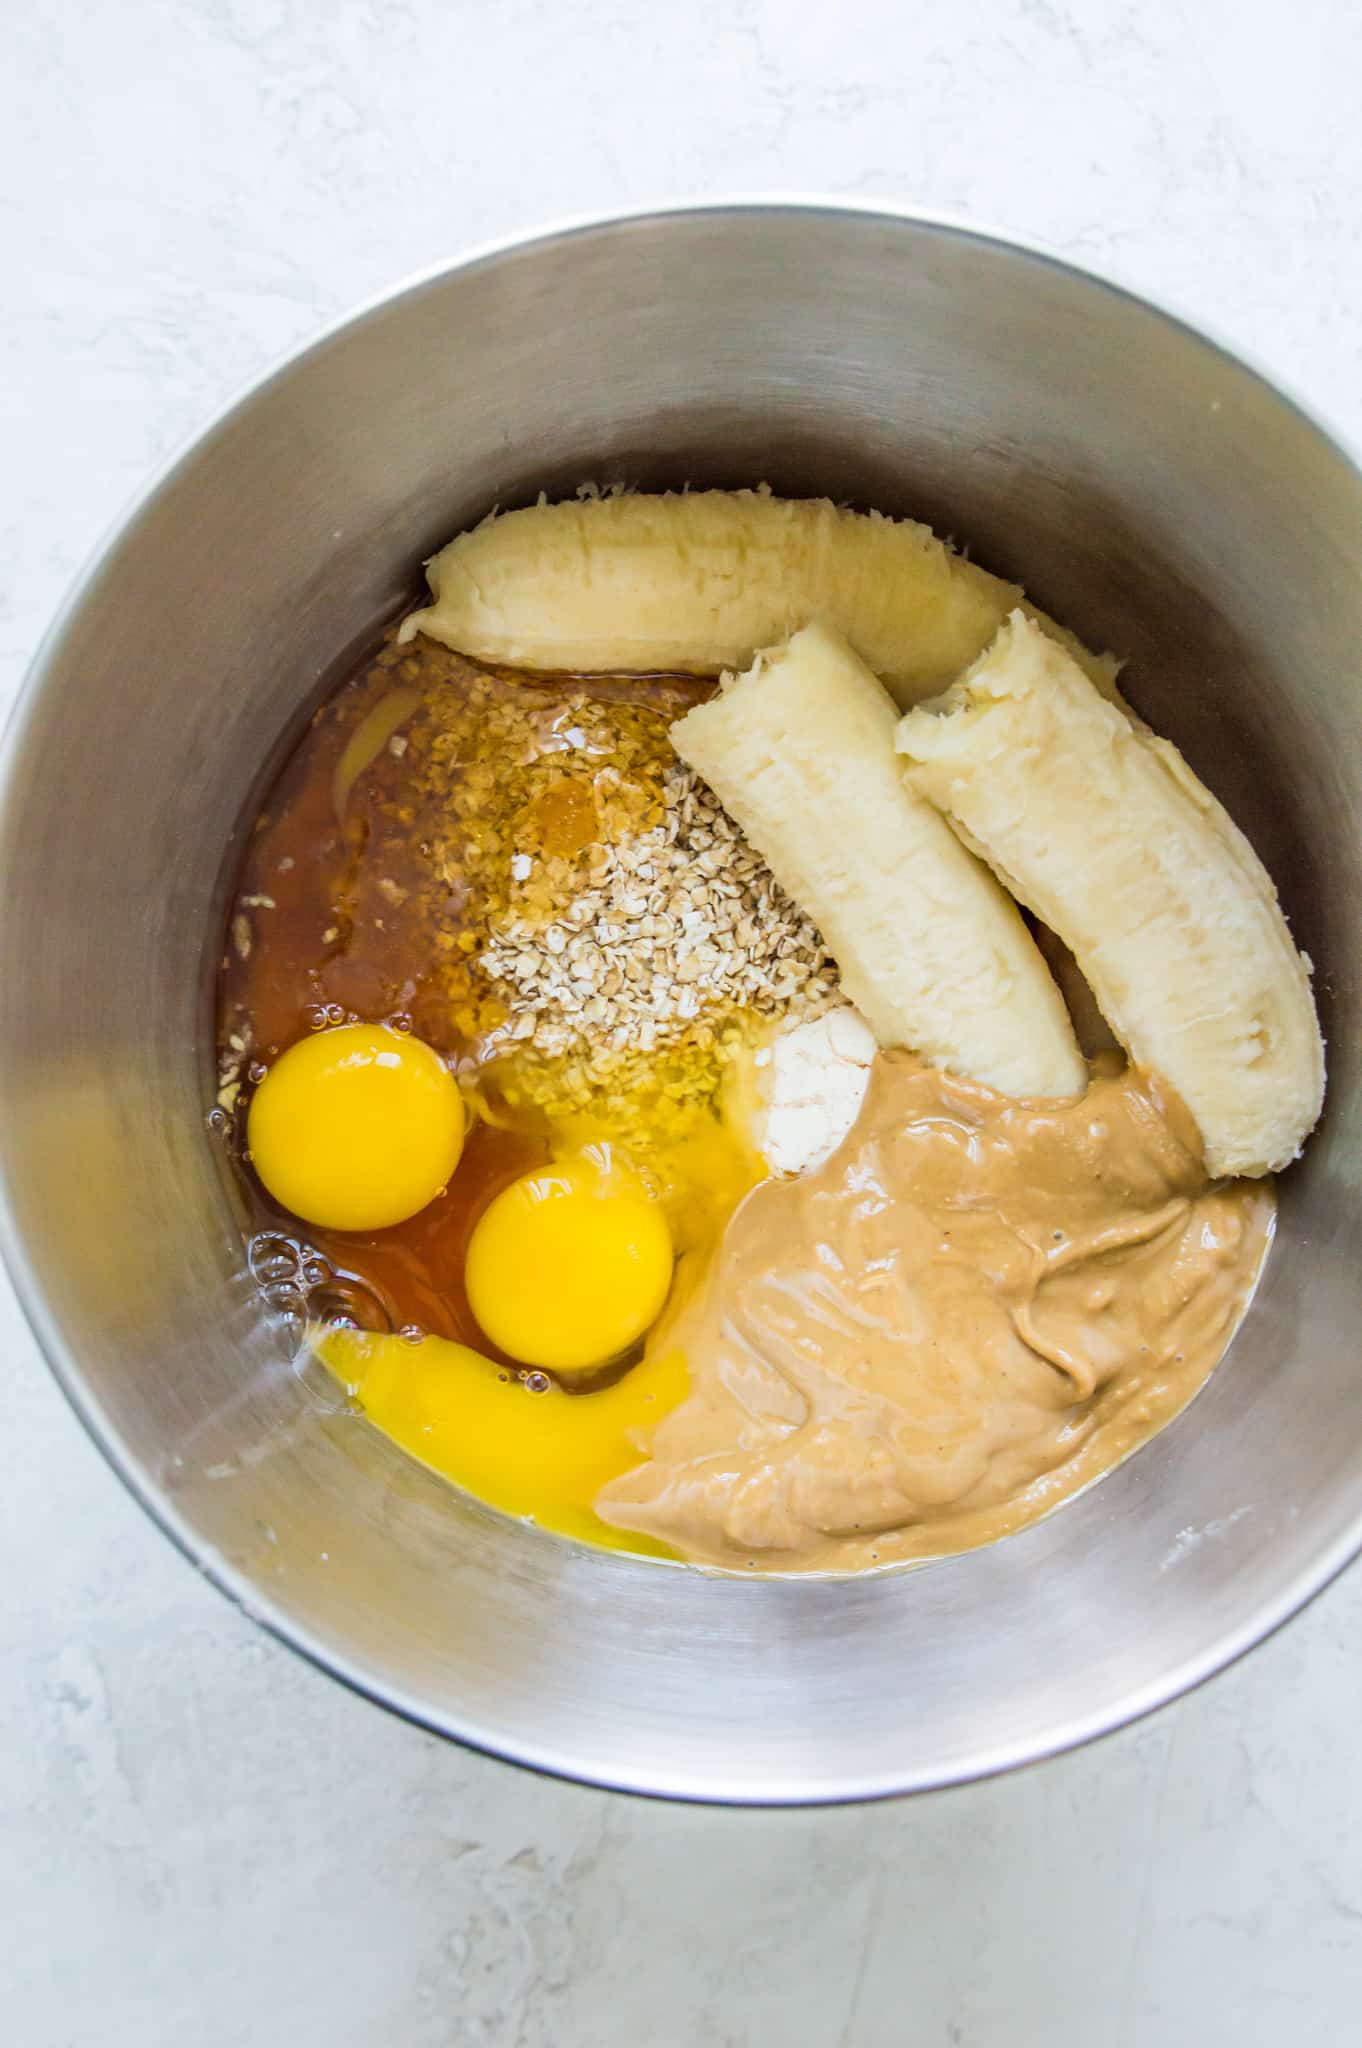 Eggs, peanut butter, bananas and oats in a large bowl.